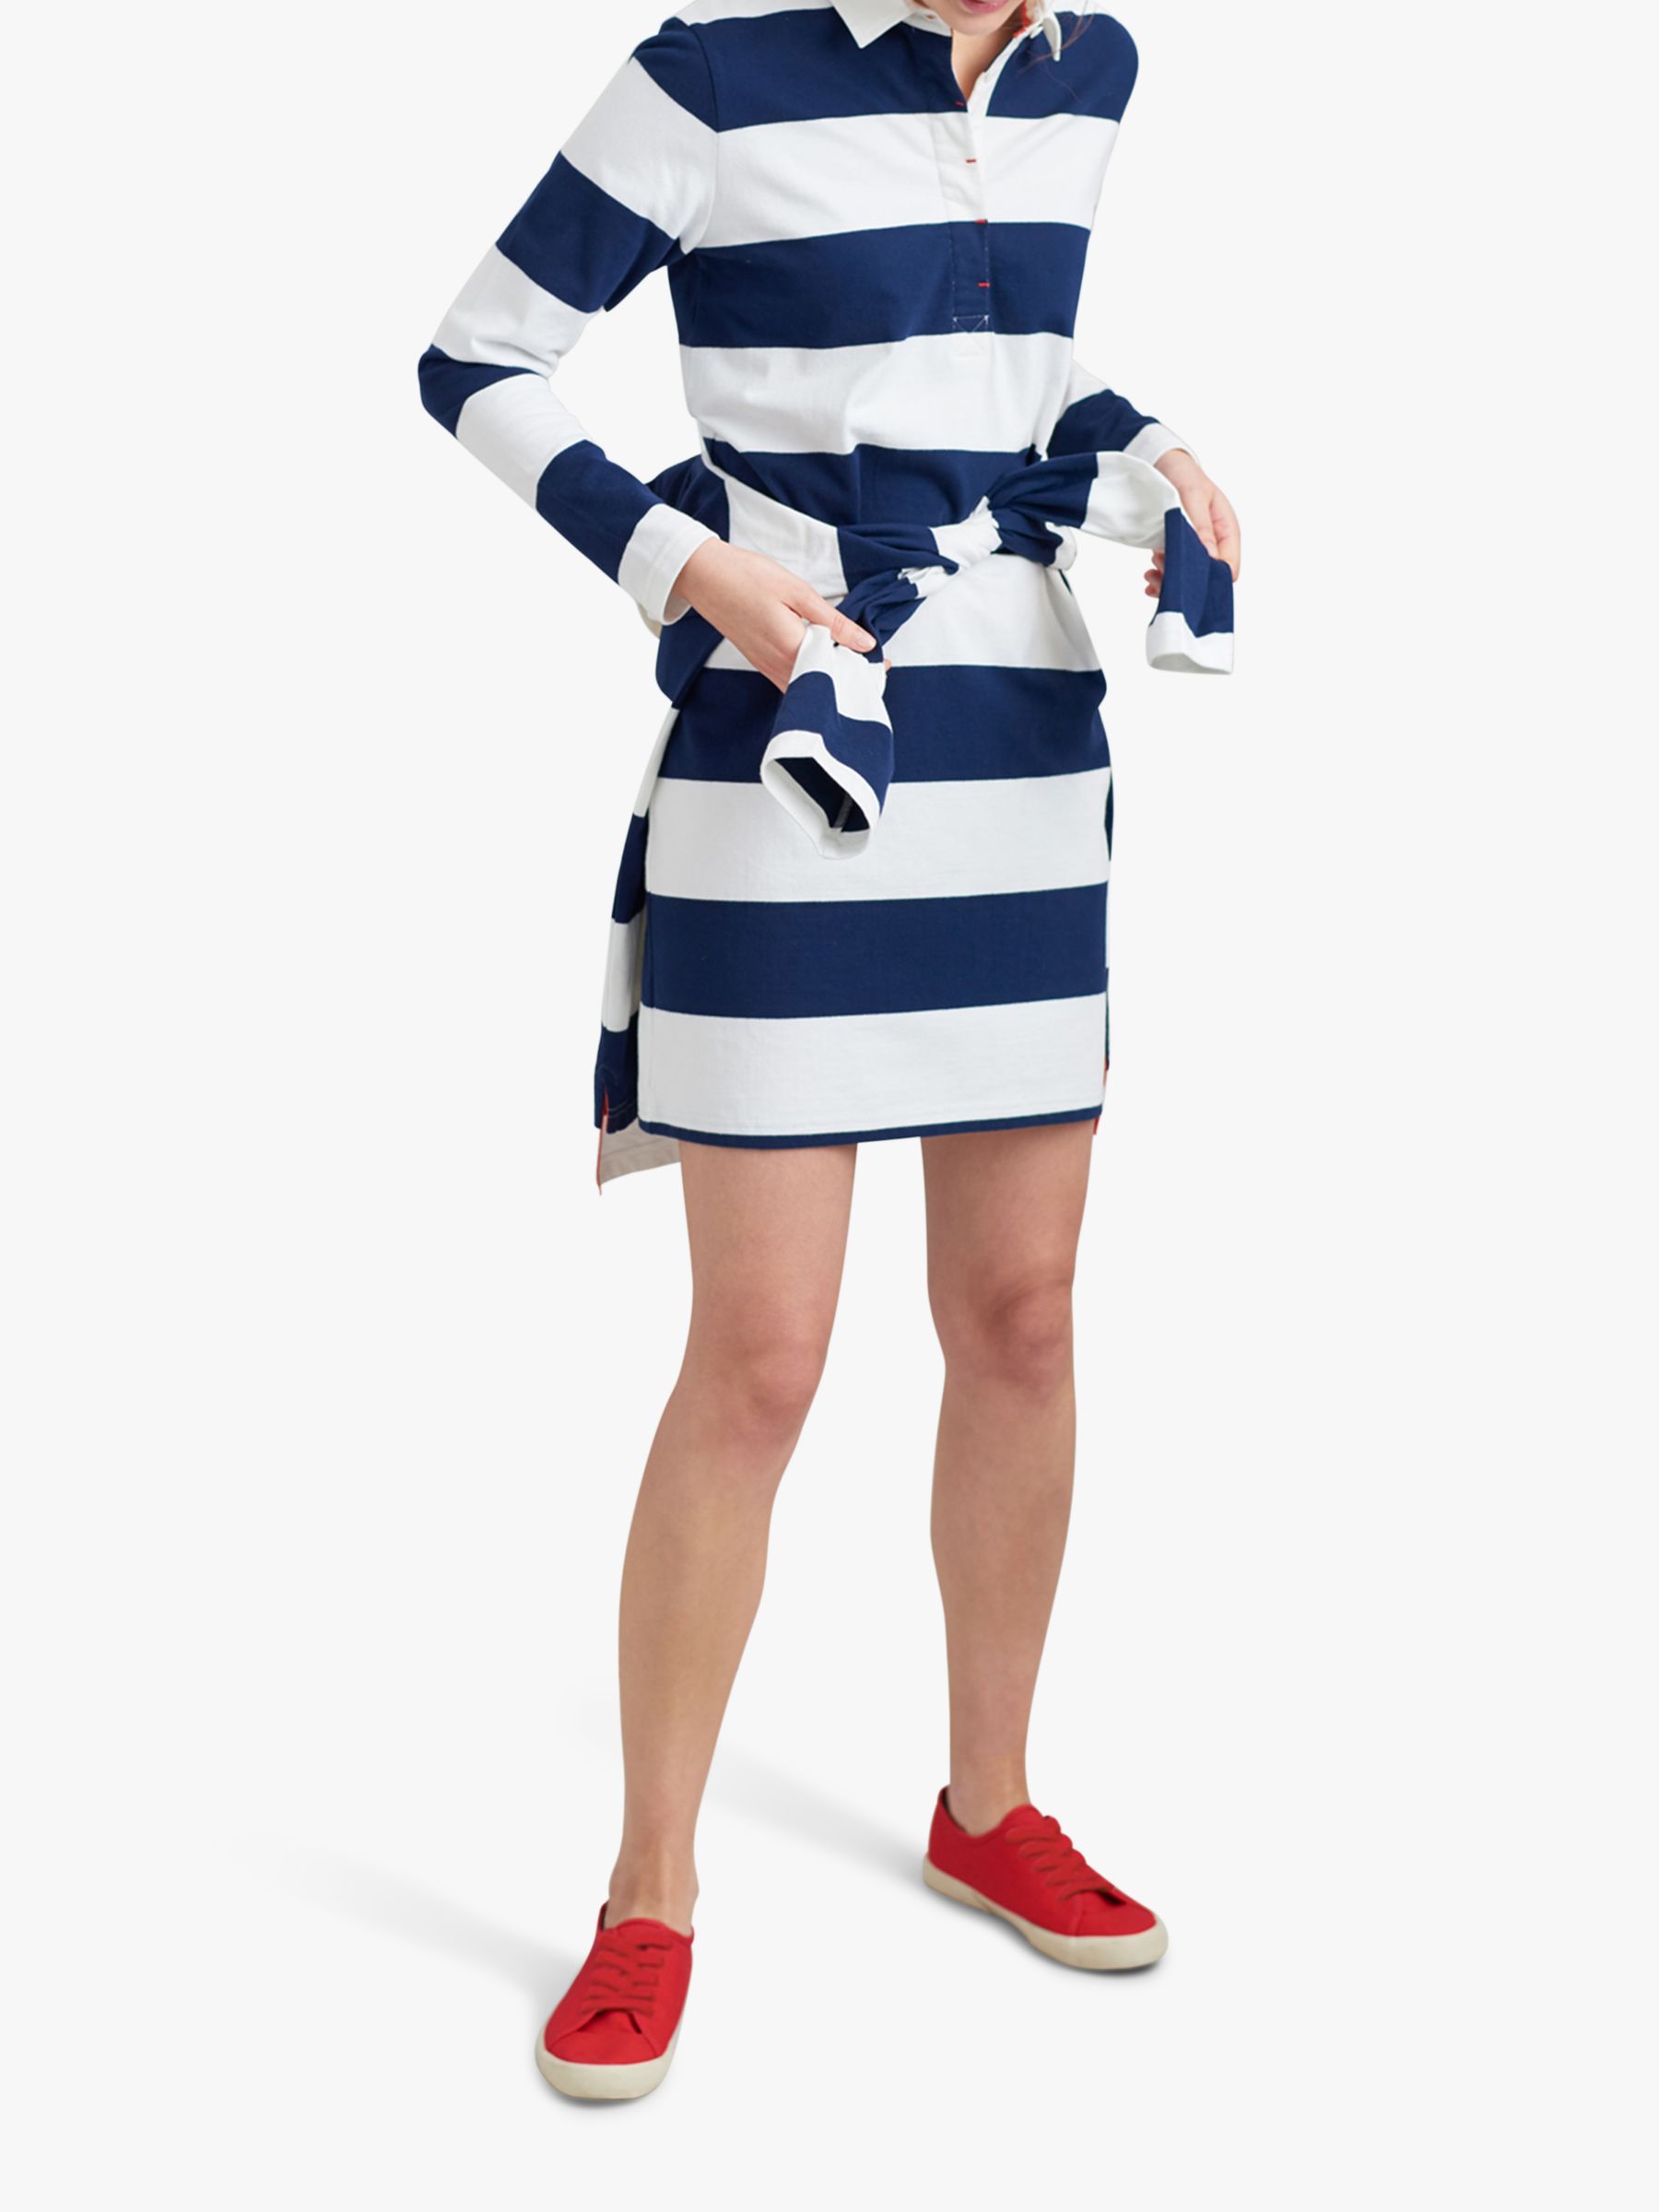 rugby jersey dress